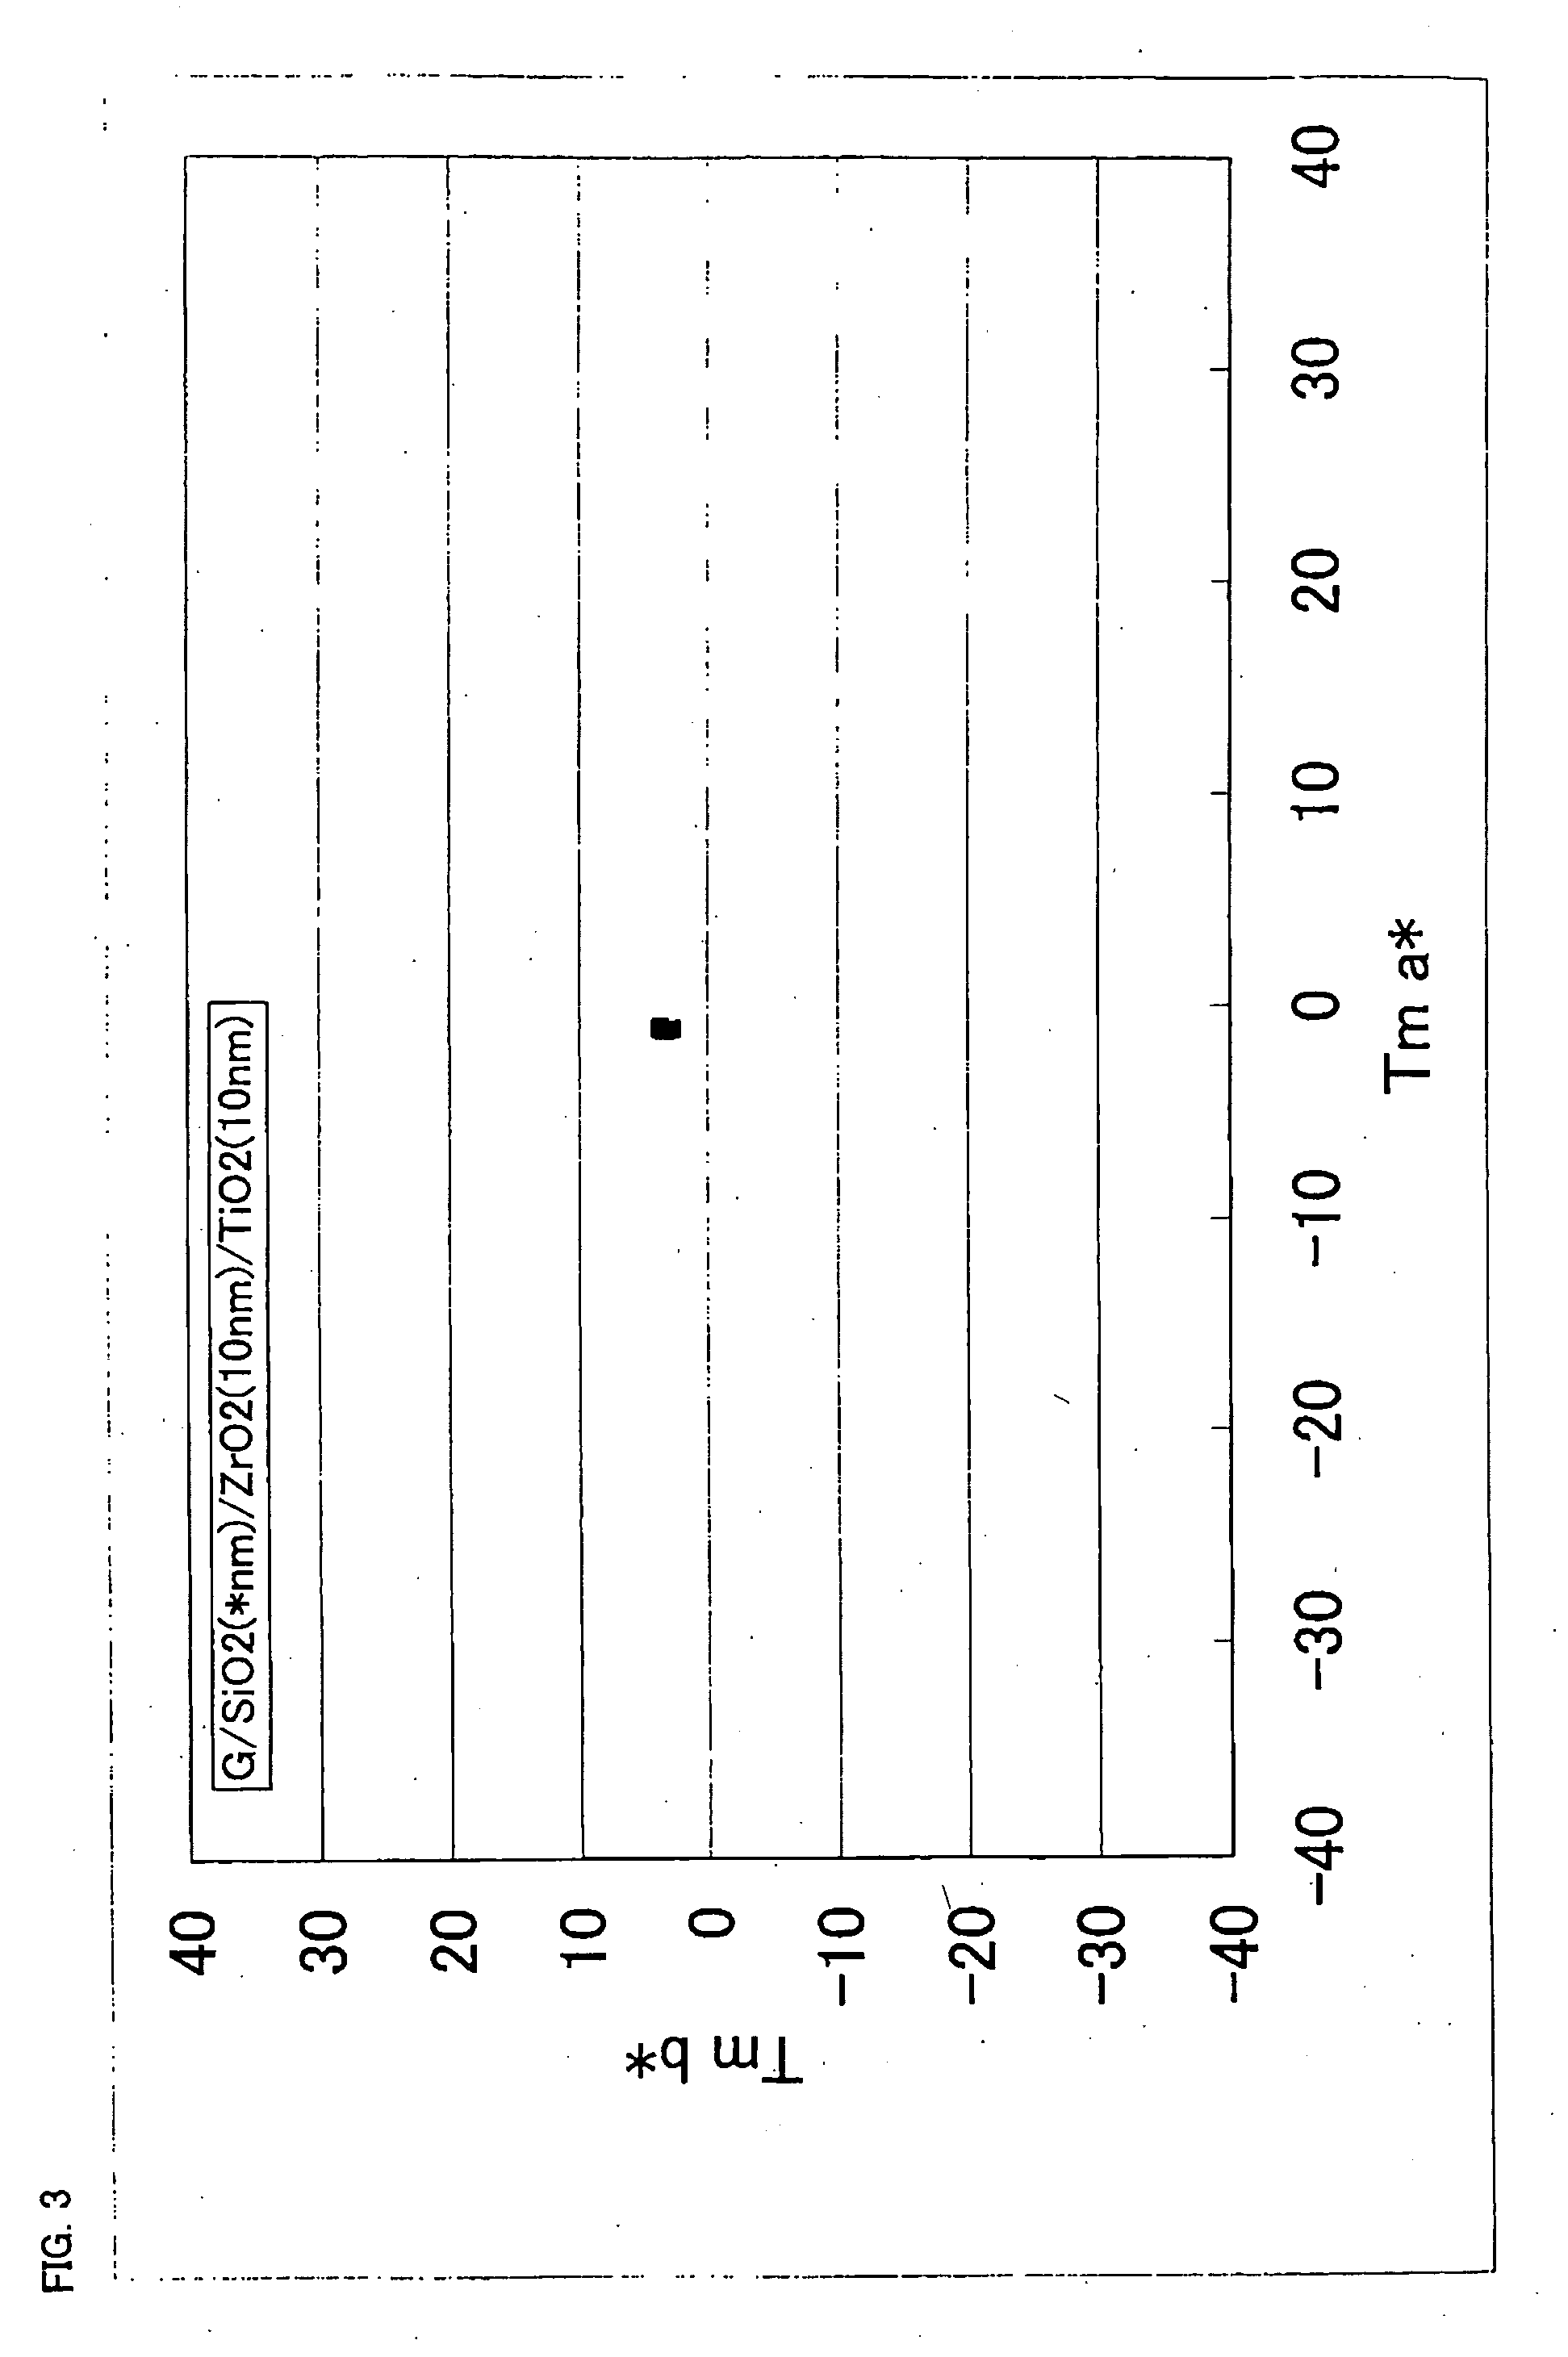 Member having photocatalytic activity and multilayered glass